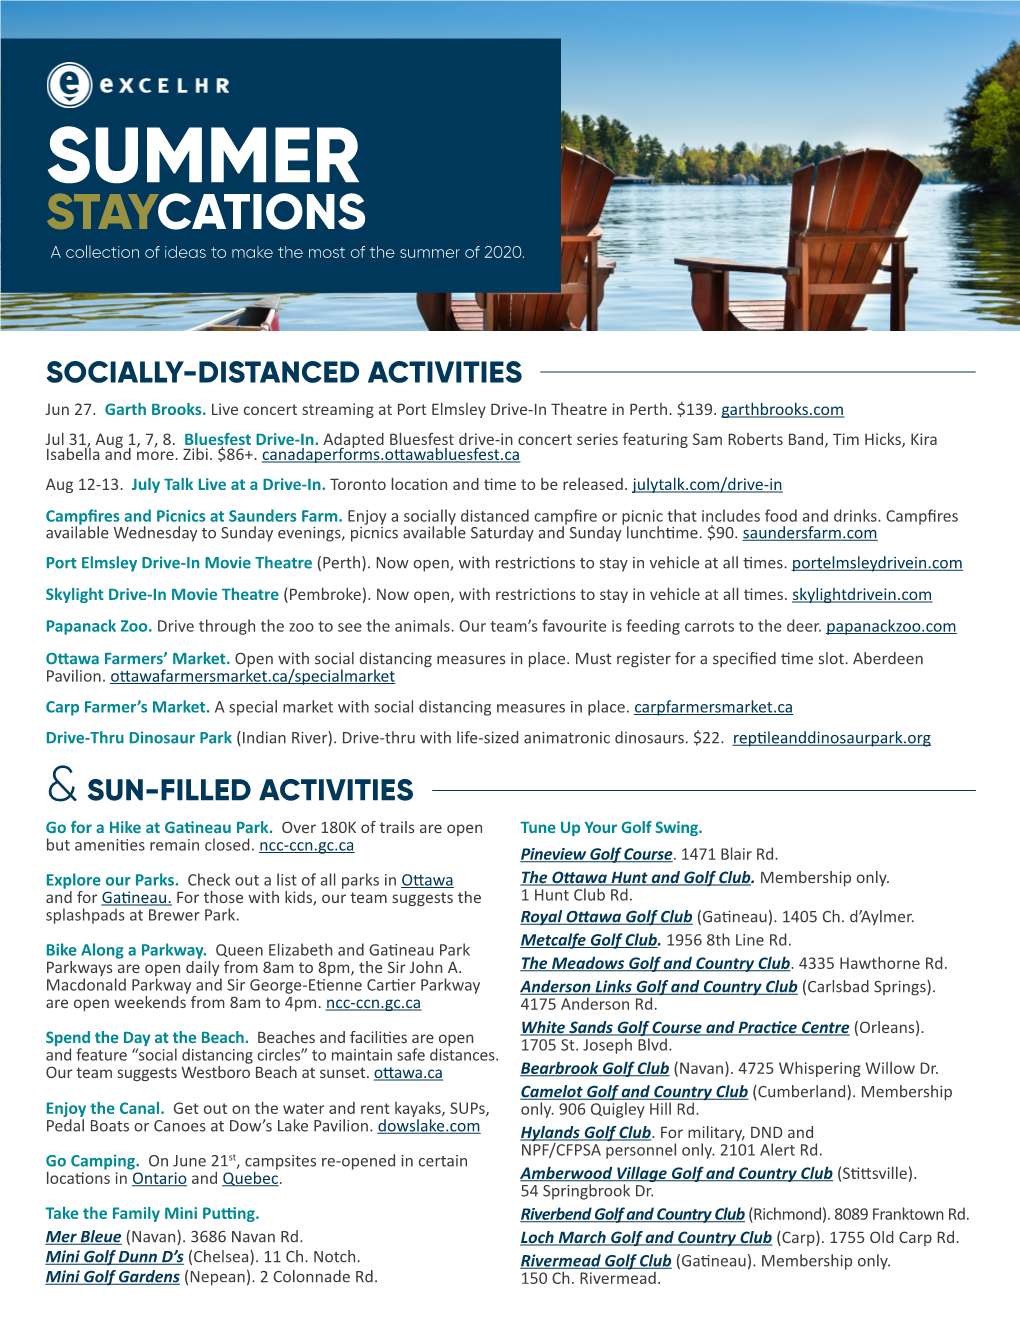 SUMMER STAYCATIONS a Collection of Ideas to Make the Most of the Summer of 2020